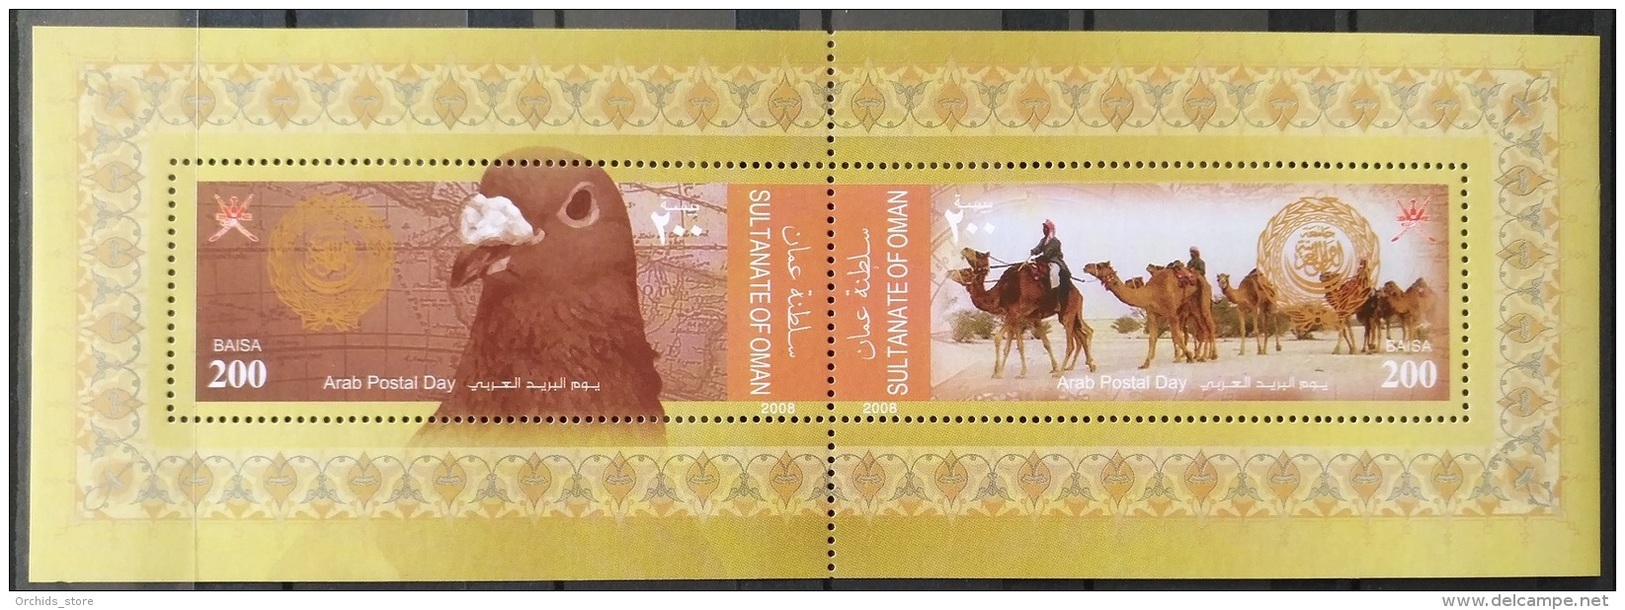 Sultanate Of Oman 2008 Arab Postal Day MNH Sheetlet - Joint Issue Between Teh Arab Countries - Dove, Camels - Oman